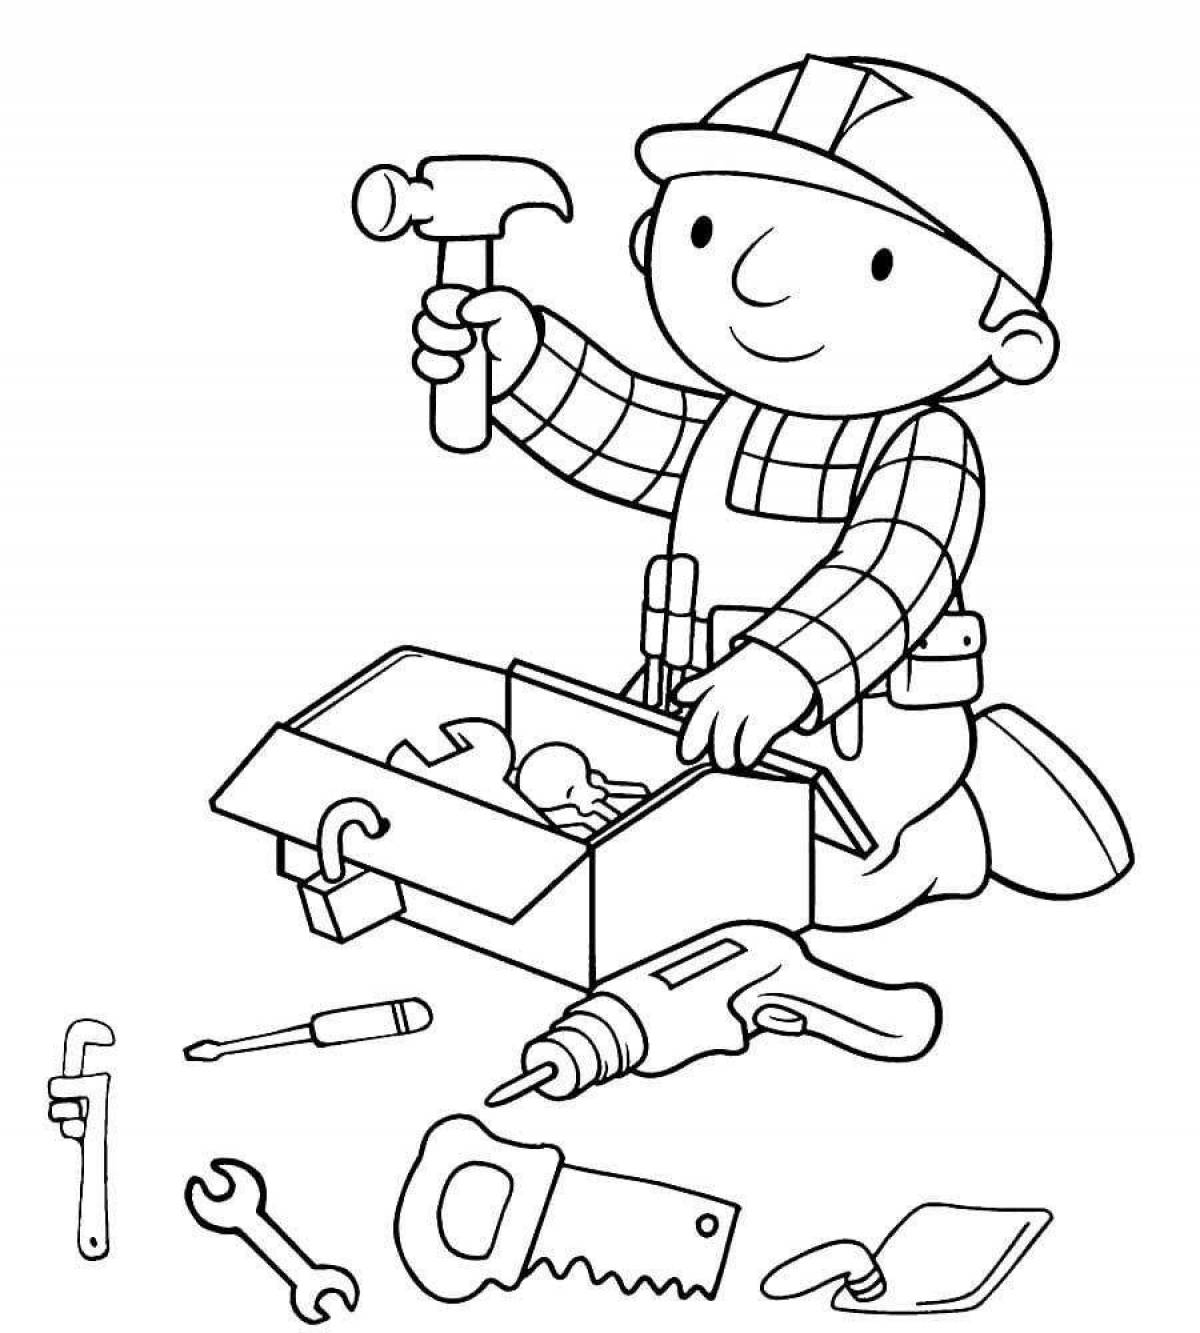 Coloring book is a funny profession of an auto mechanic